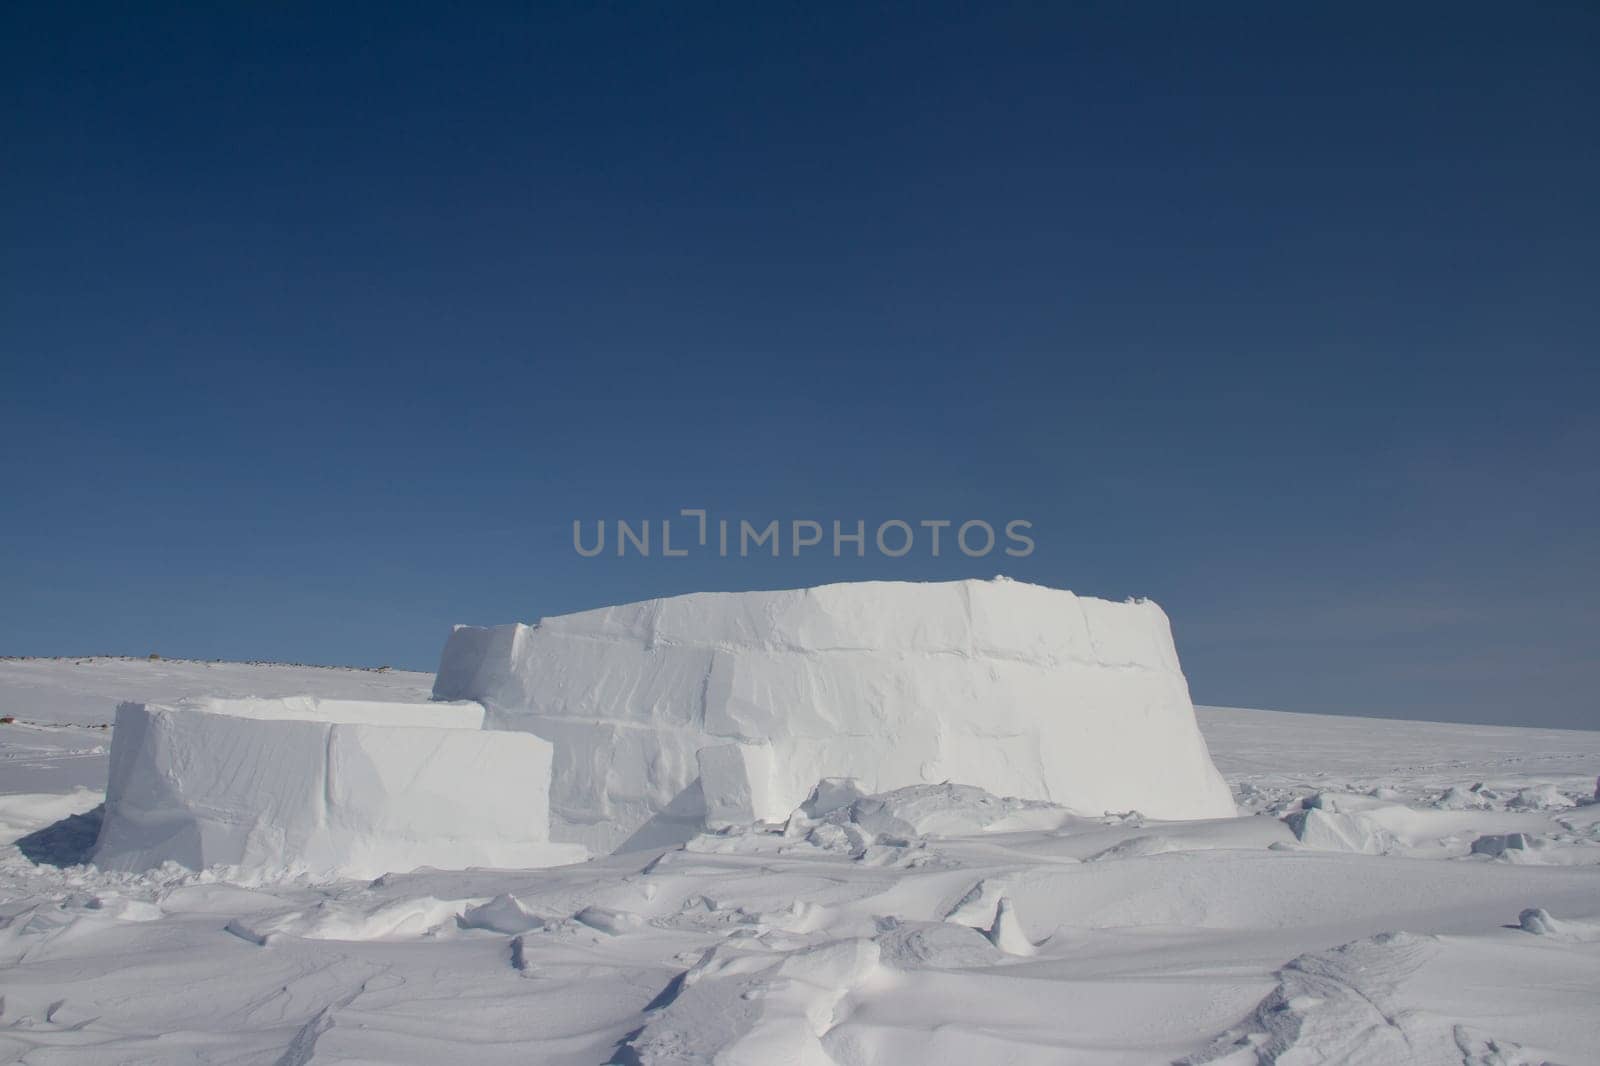 The beginnings of an igloo, a snow shelter from the harsh winter elements. Near Arviat, Nunavut, Canada